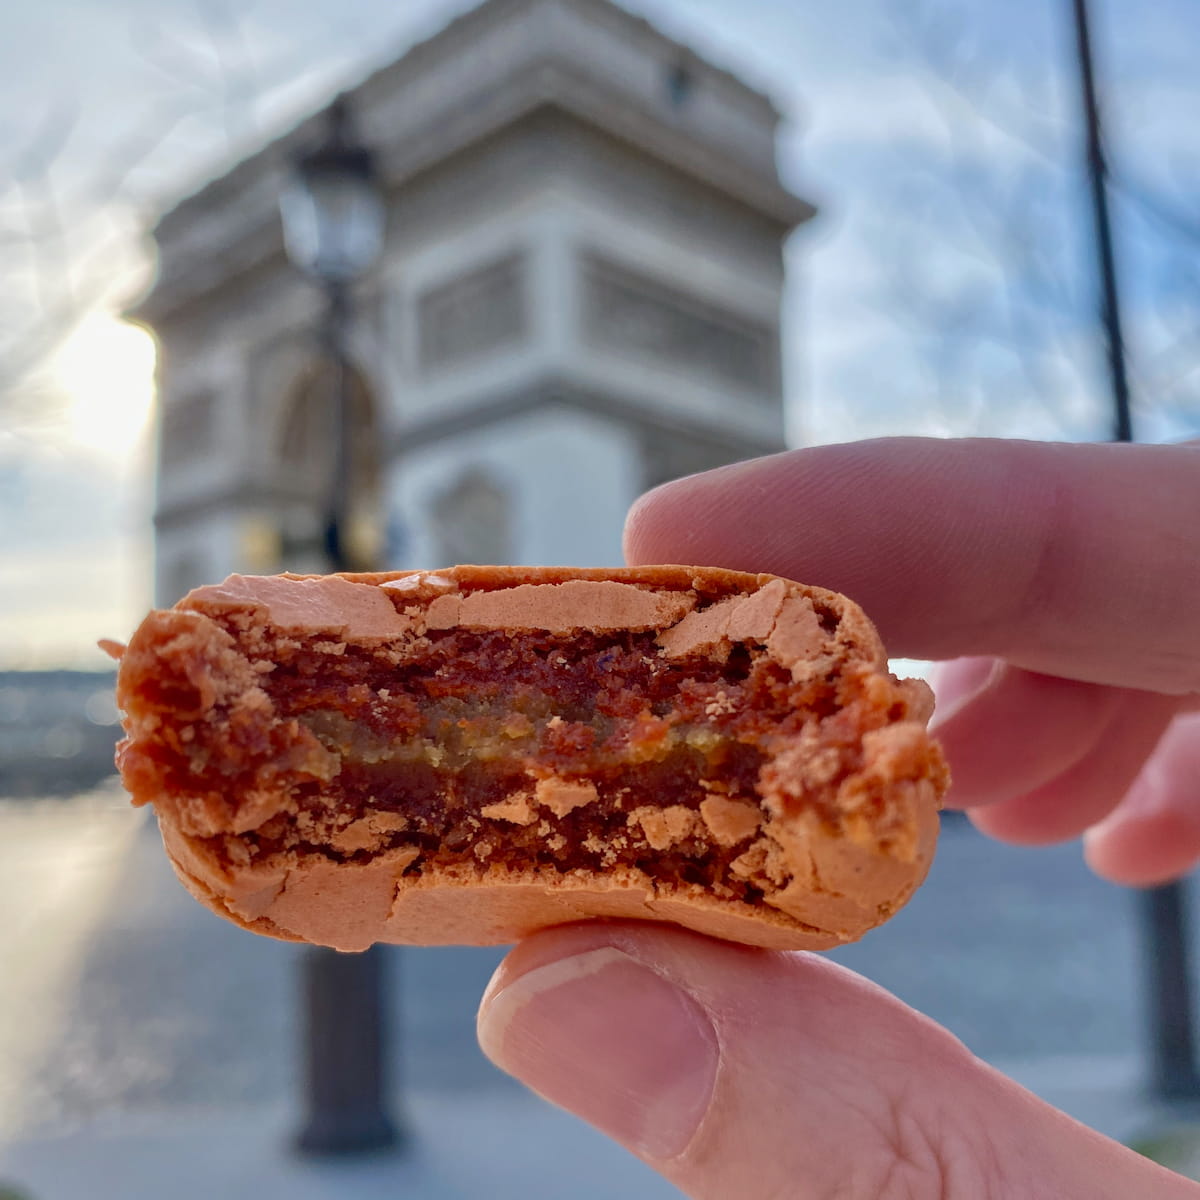 biting into a fondant and crispy macaron in front of the Arc de Triomphe in Paris